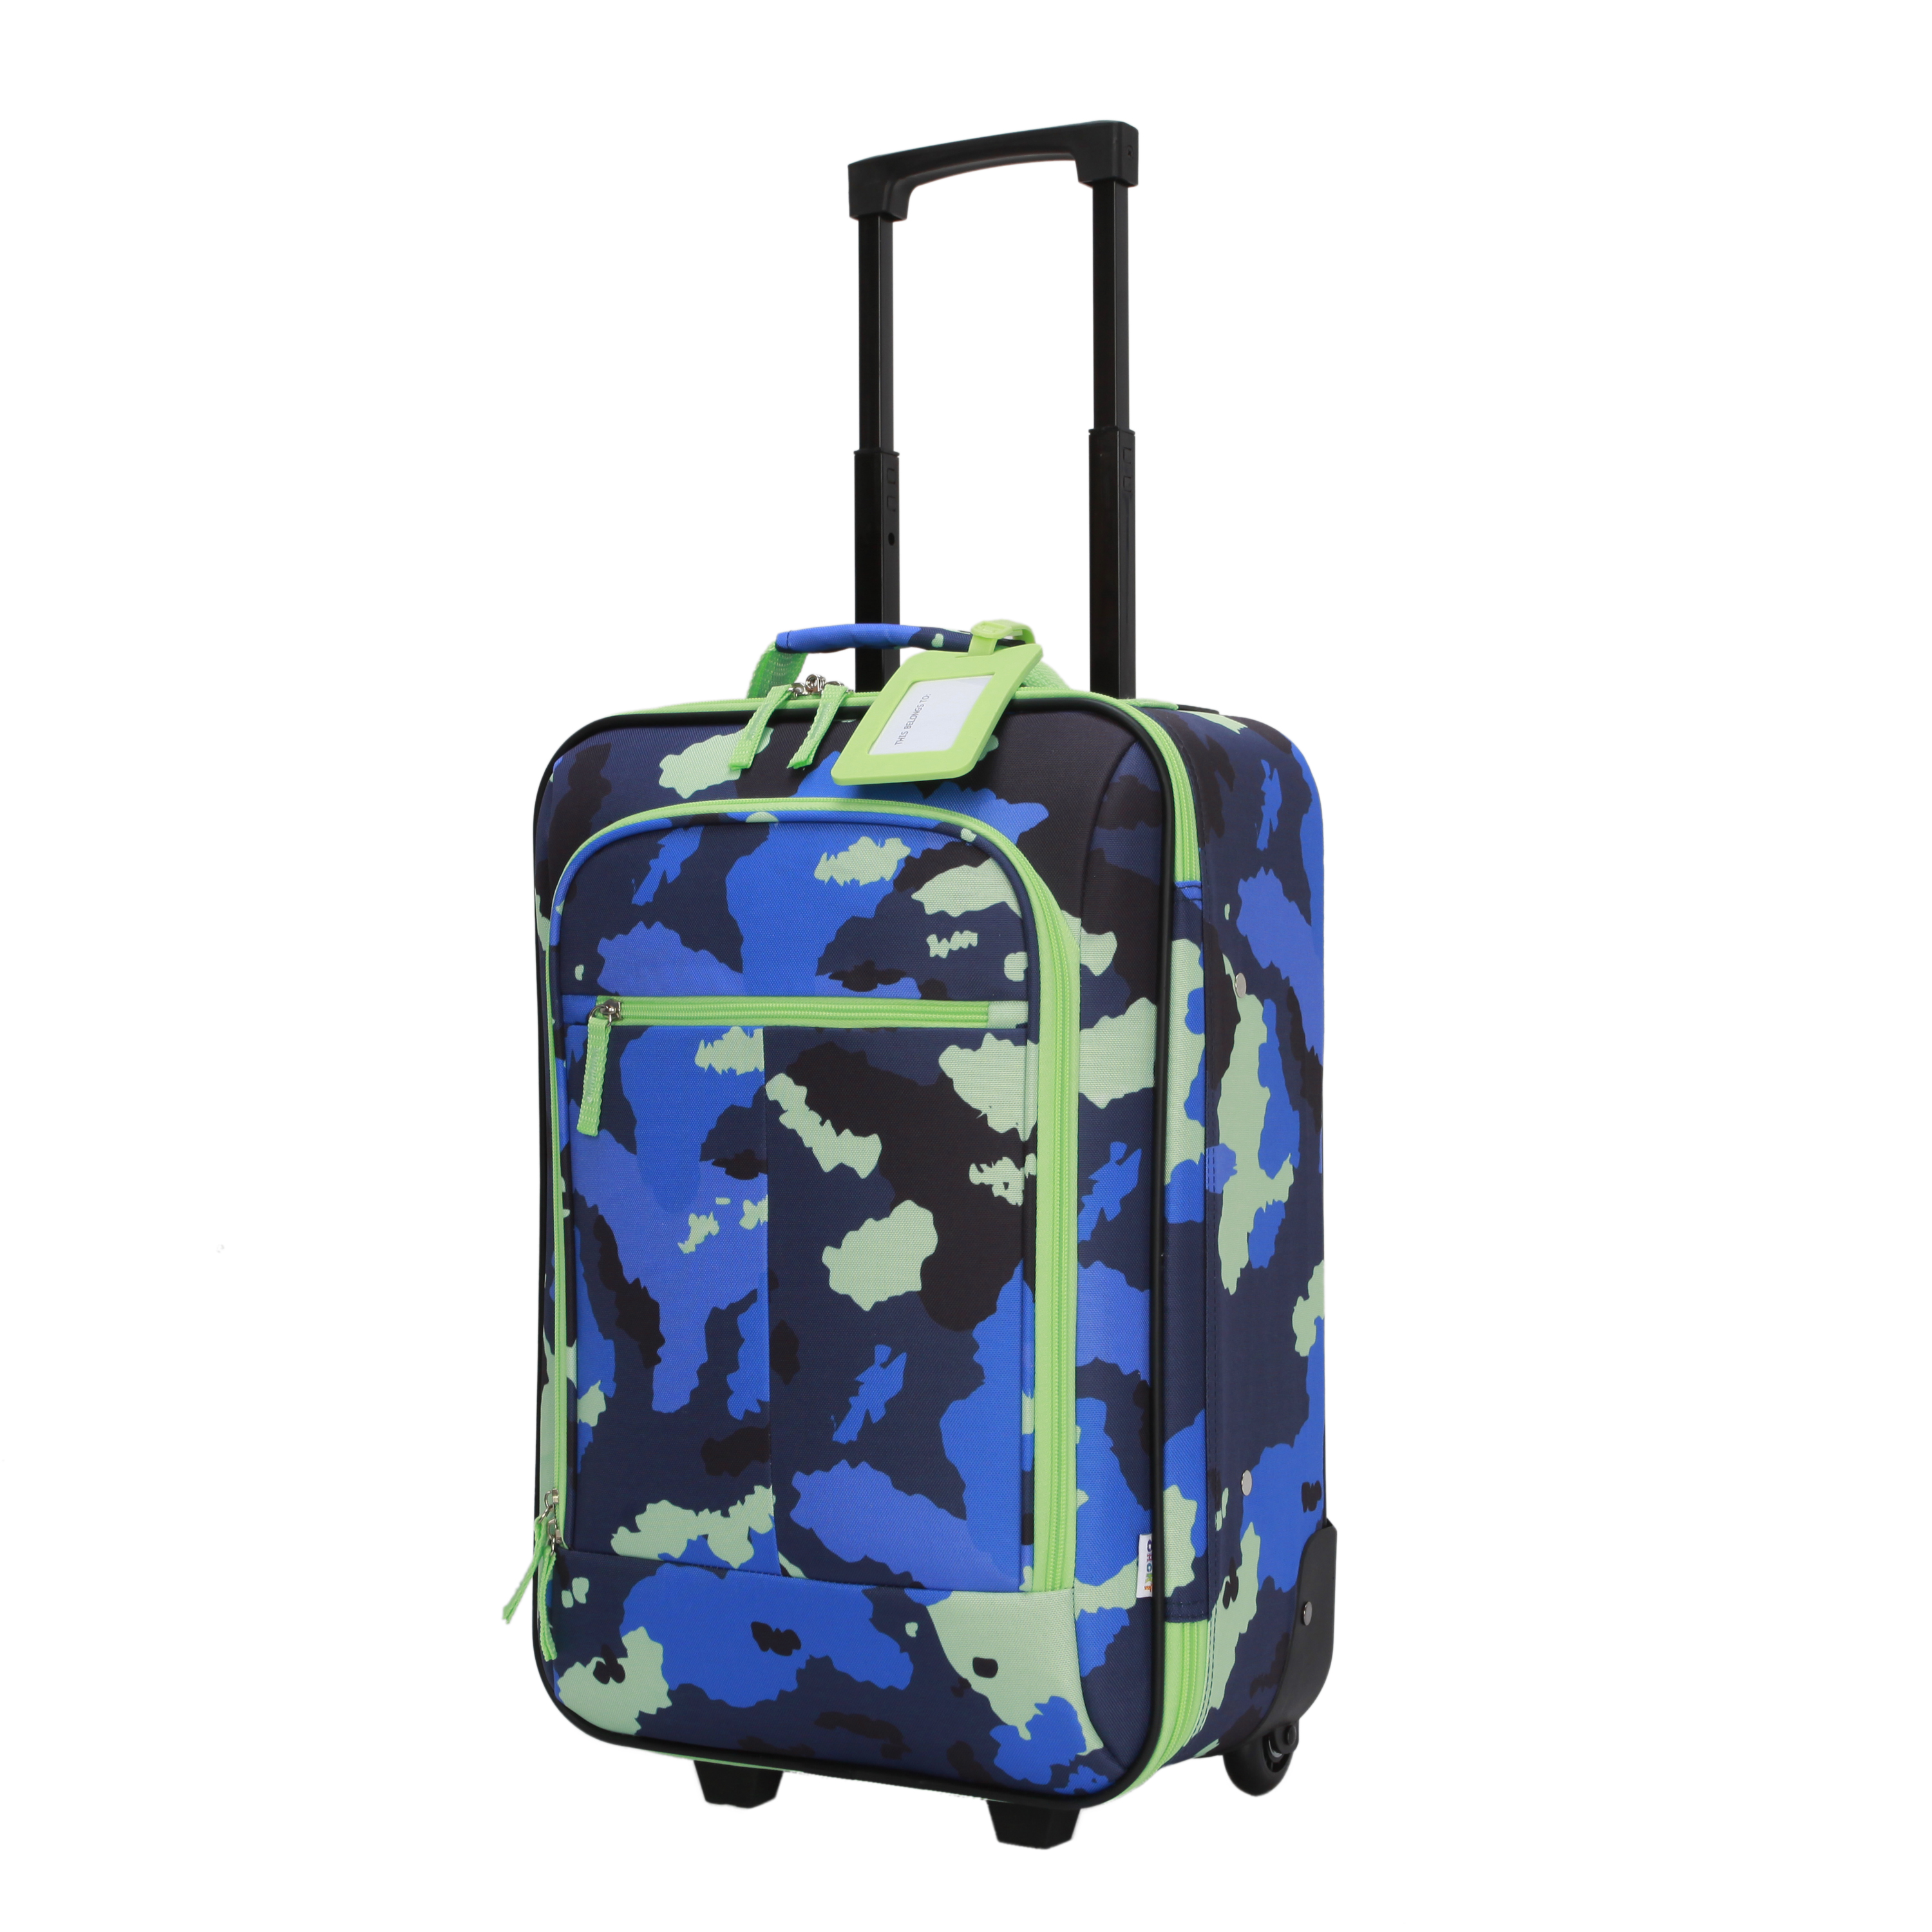 CRCKT 4 Piece 18-inch Soft side Carry-on Kids Luggage Set, Blue Camo - image 4 of 23